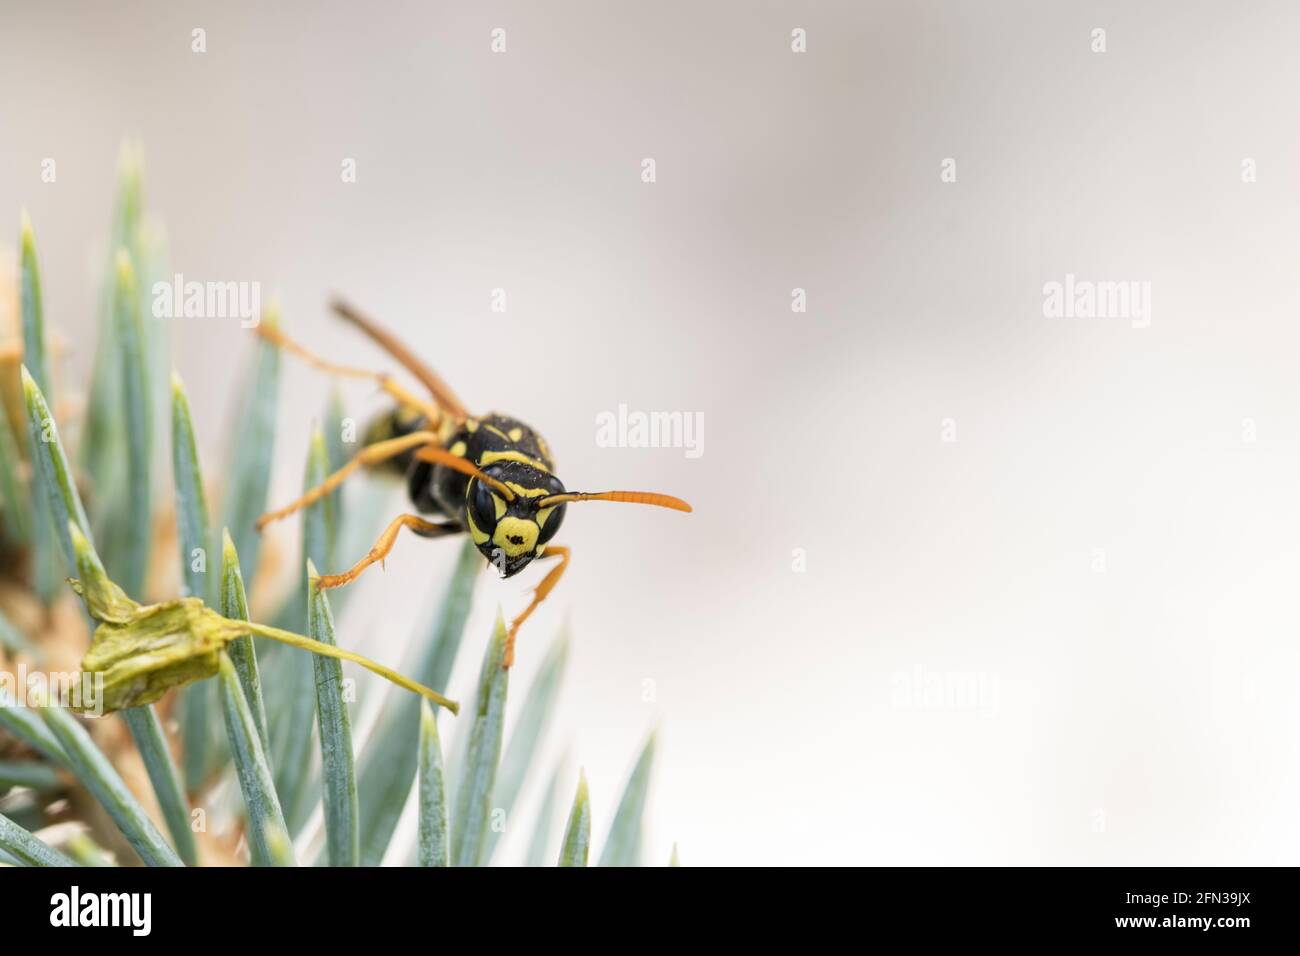 Yellow jacket wasp close up predatory insect. Injured wasp with one wing. Stock Photo